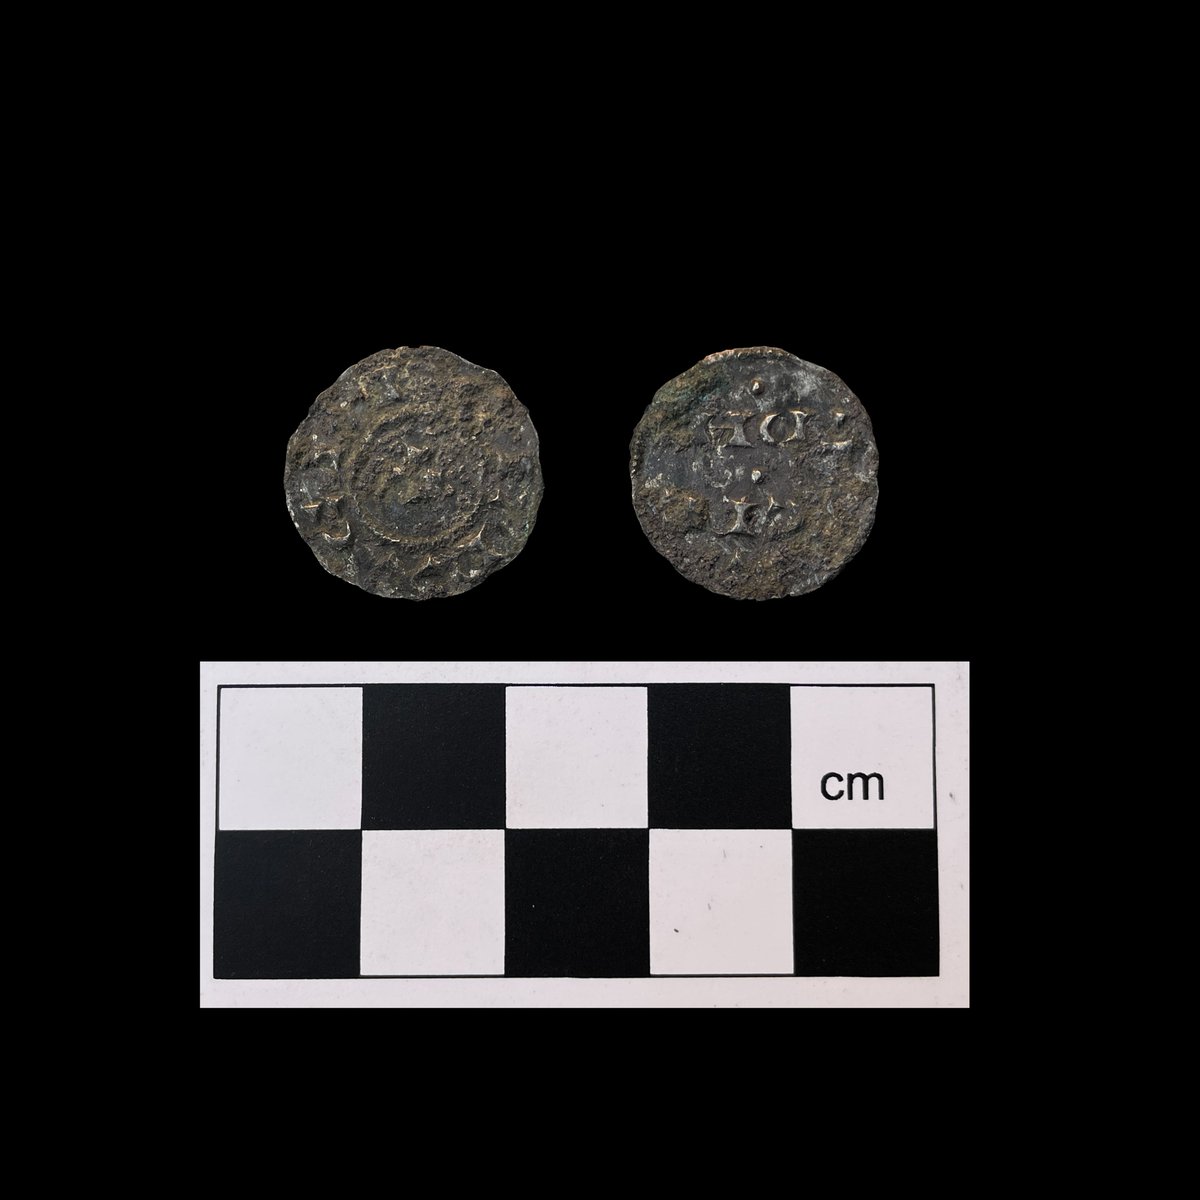 #FindsFriday this week is a silver Anglo-Saxon penny (c.AD 880-973) from @LeicsCathedral. The first to be found in Leicester in nearly 20 years.
#AngloSaxon #Leicester #archaeology #LeicesterCathedralRevealed #HeritageFund @uniofleicester